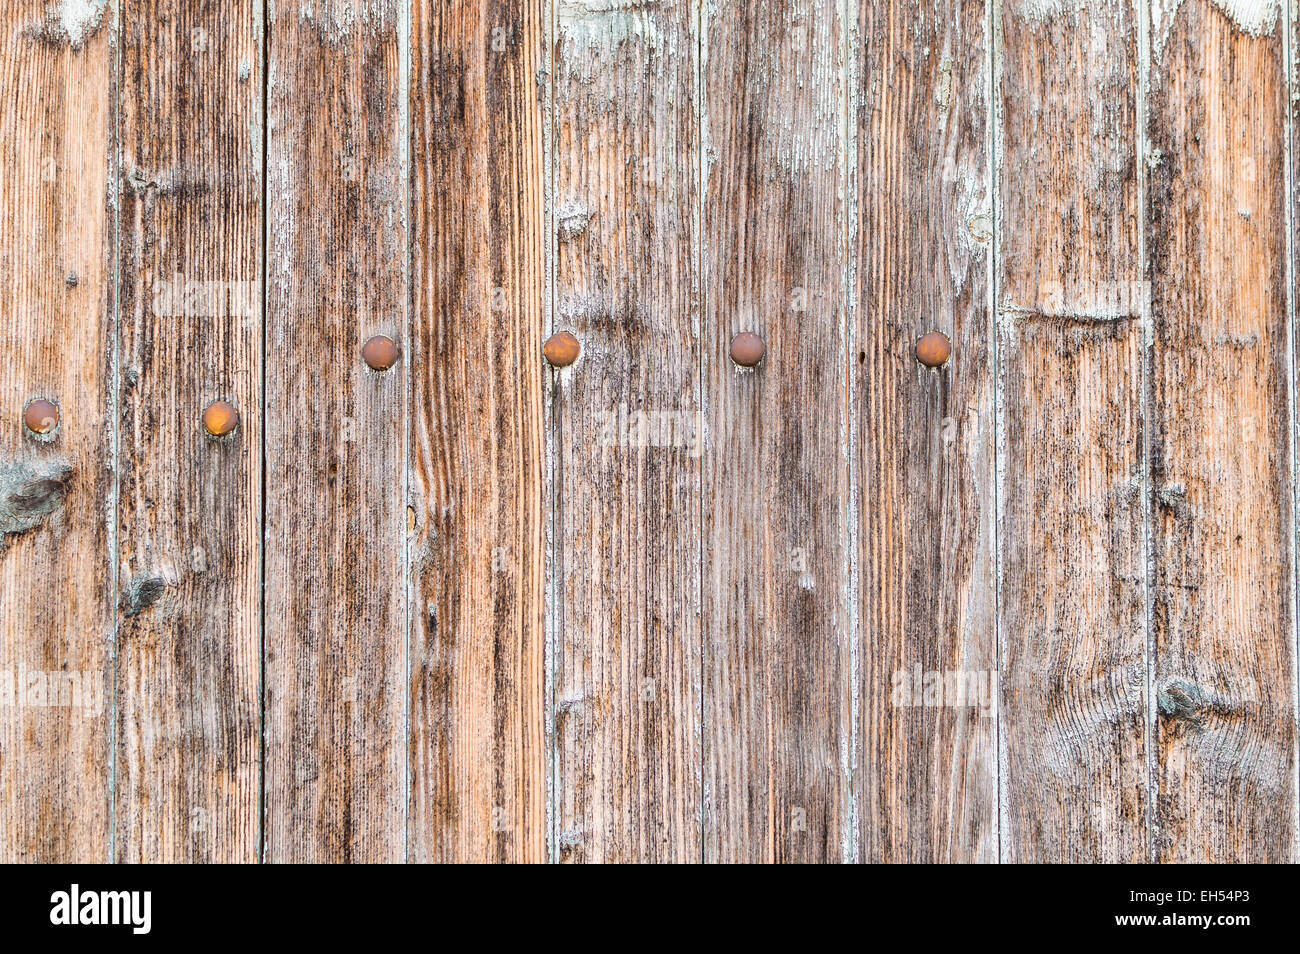 Panel of old wood with nails Stock Photo